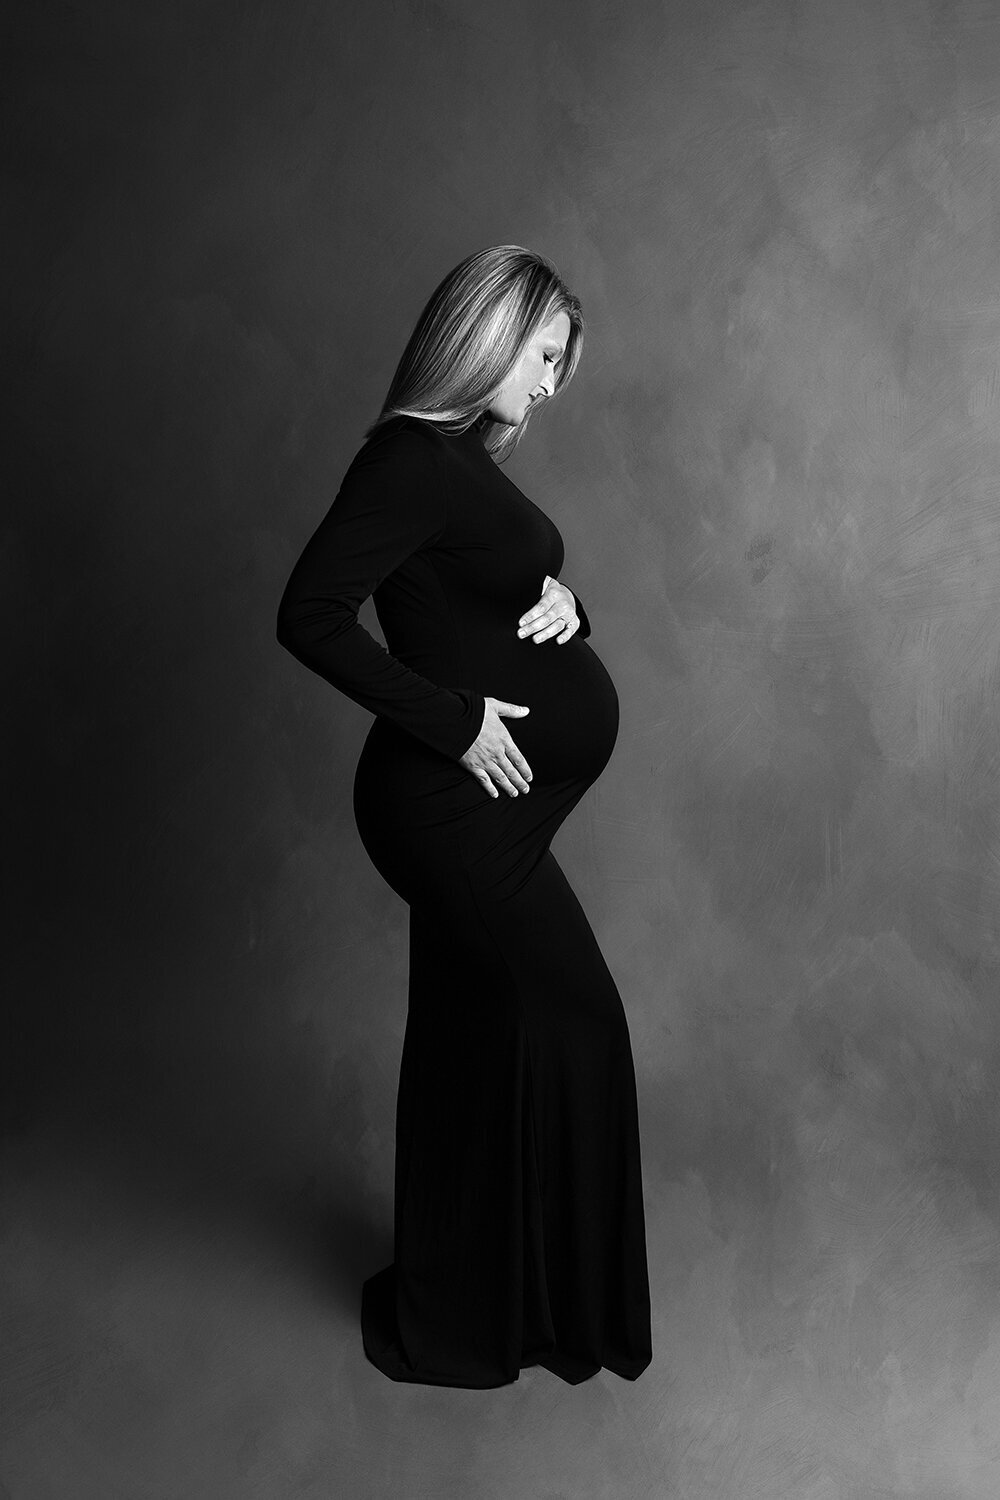 New-Orleans-maternity-photographer-17